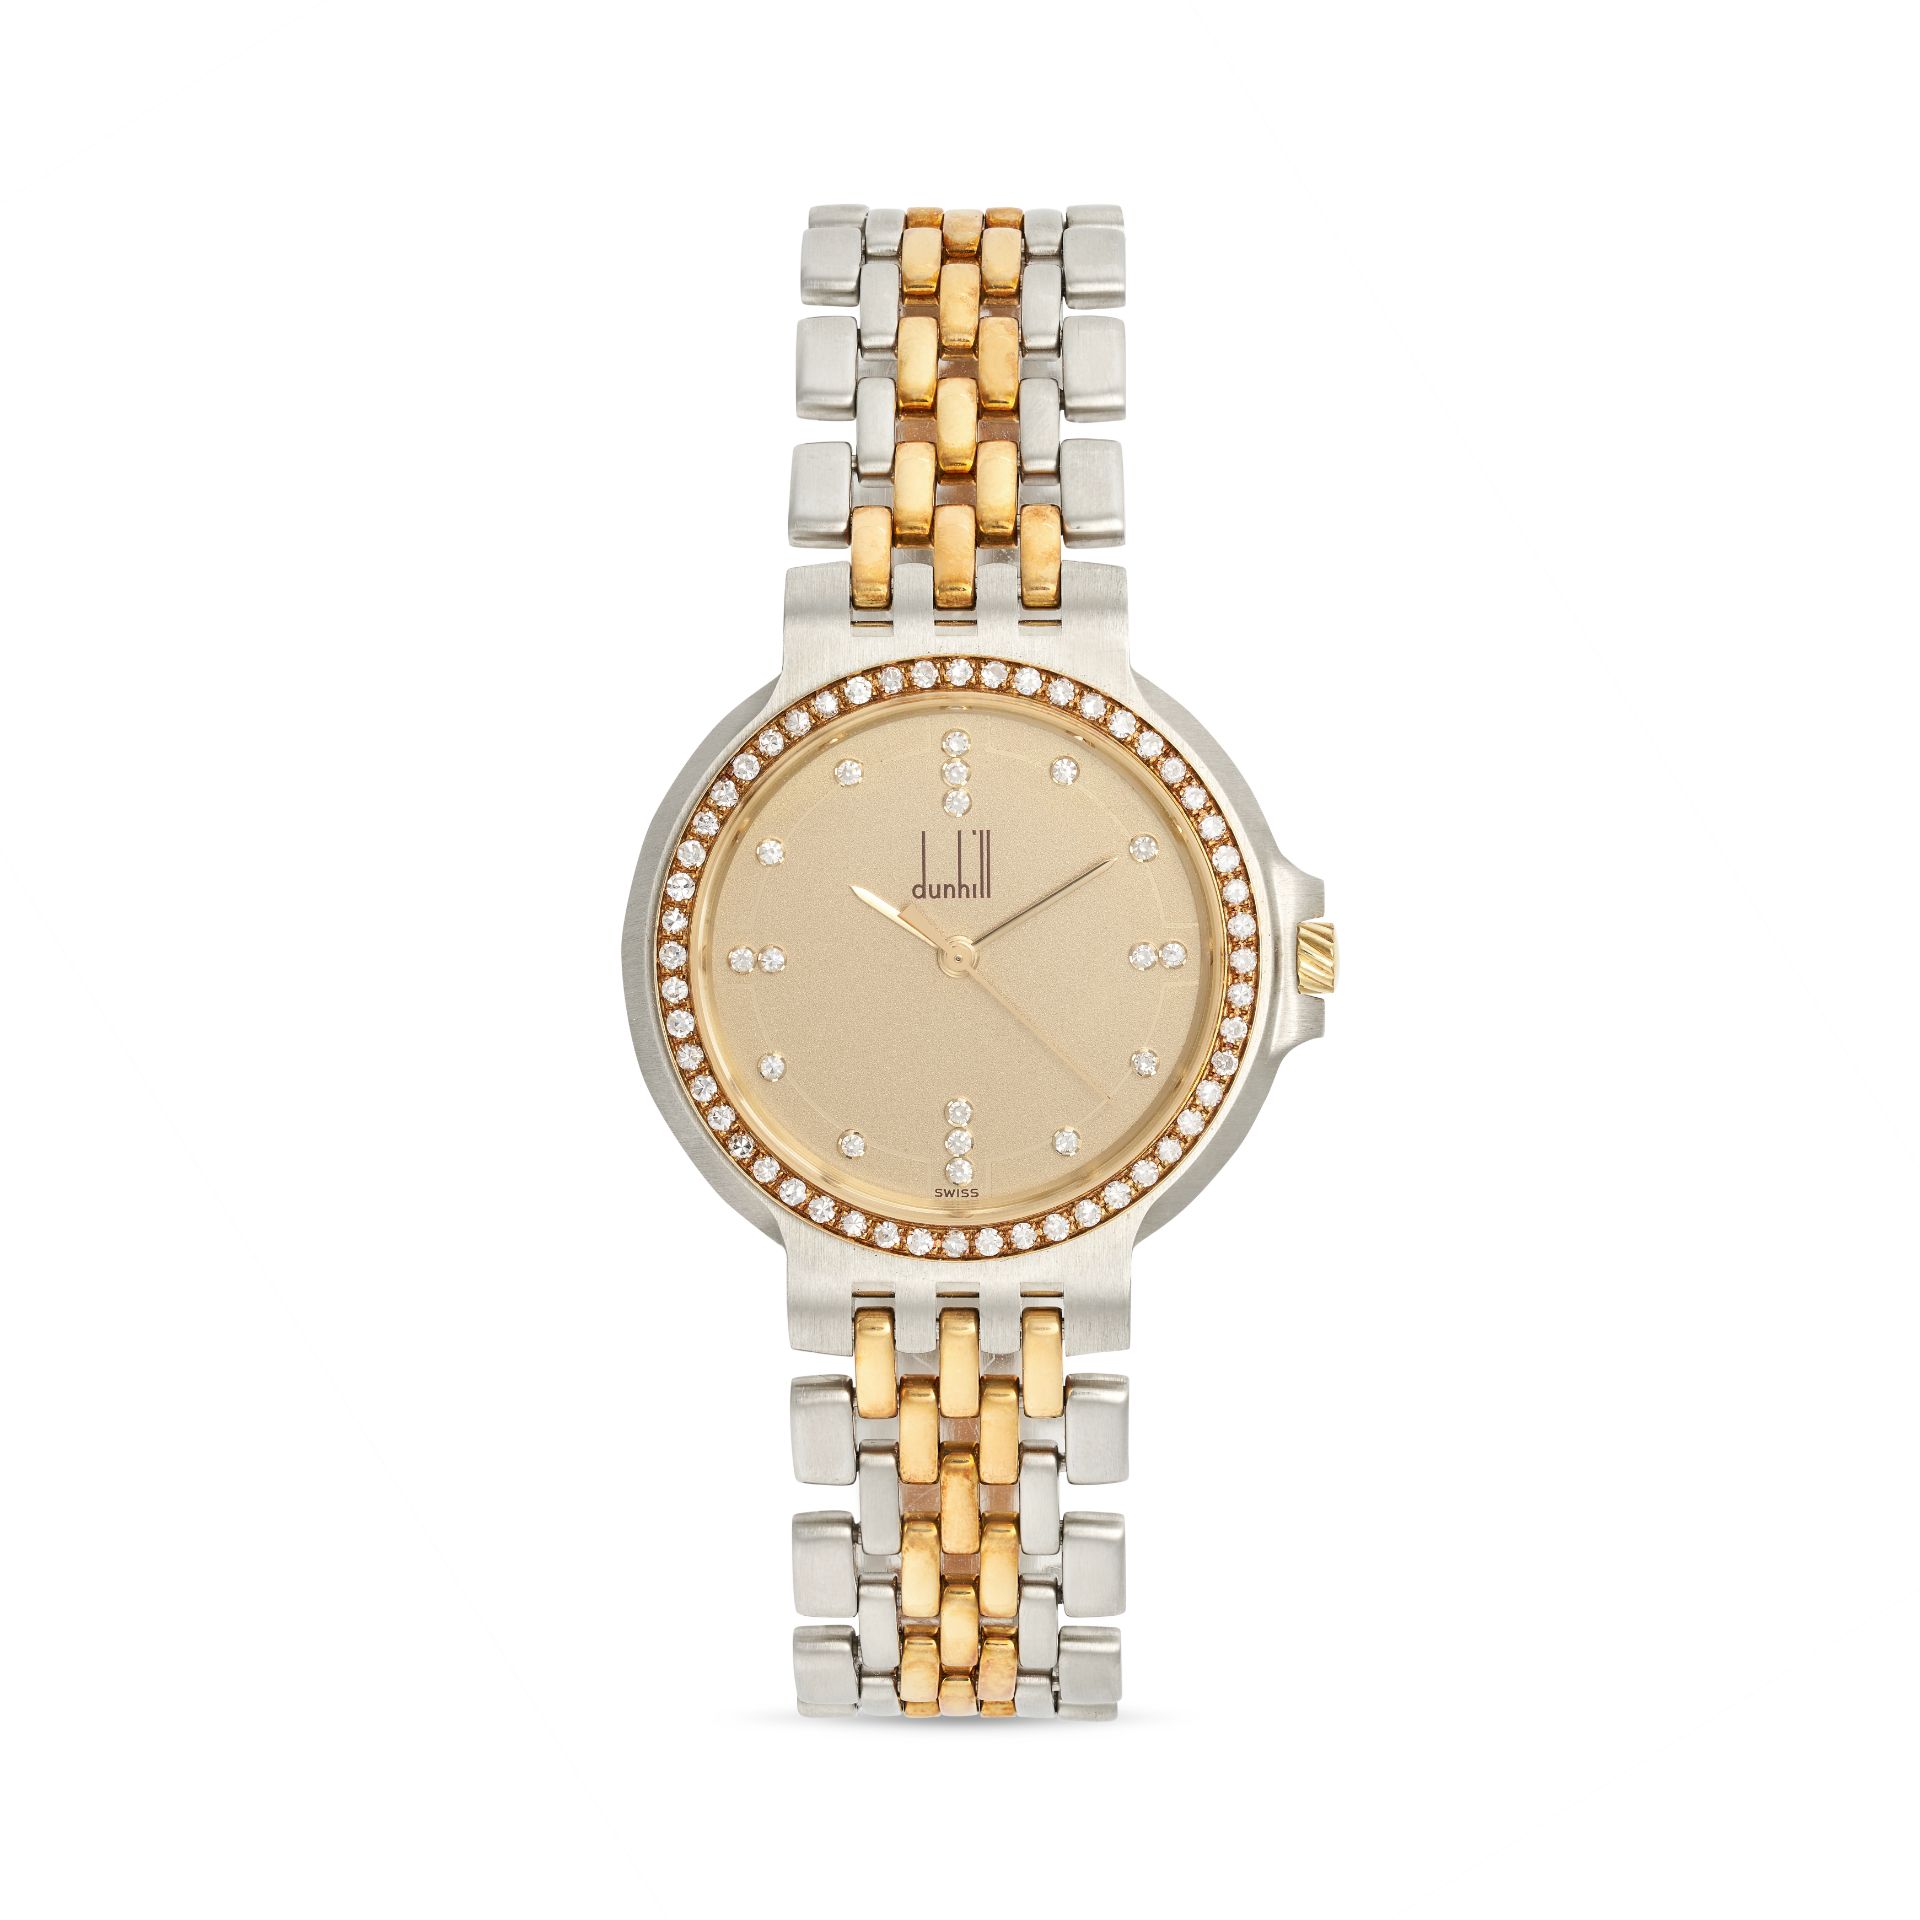 ALFRED DUNHILL, AN ELITE DIAMOND WRISTWATCH in stainless steel and gold plate, champagne dial wit...